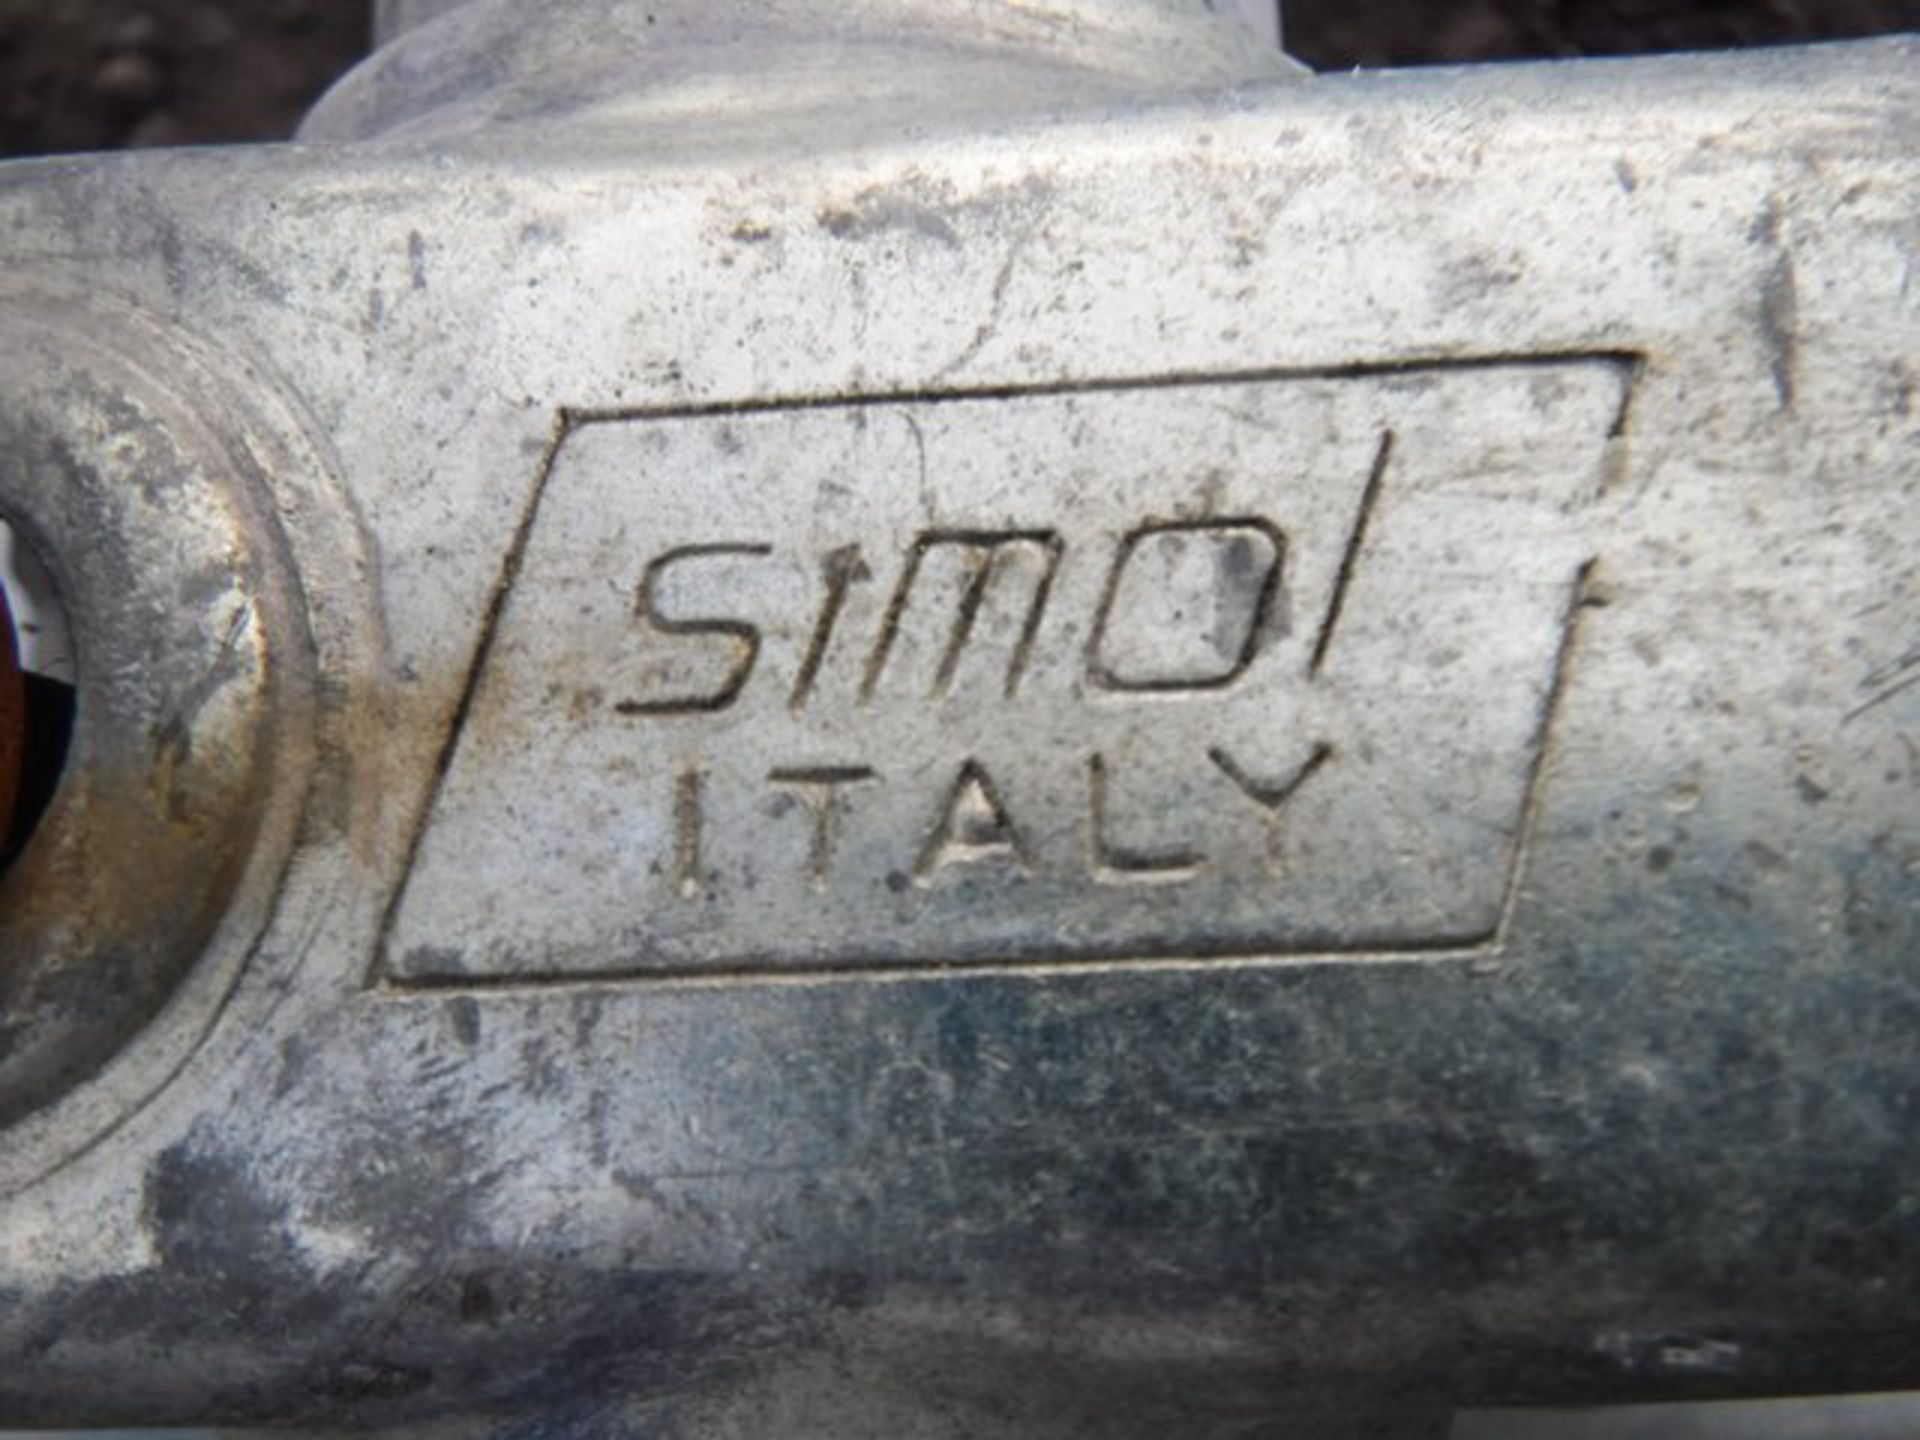 SIMOL ITALY TOWABLE YARD/LAWN BRUSH, 6FT WIDE APPROX - Image 2 of 2